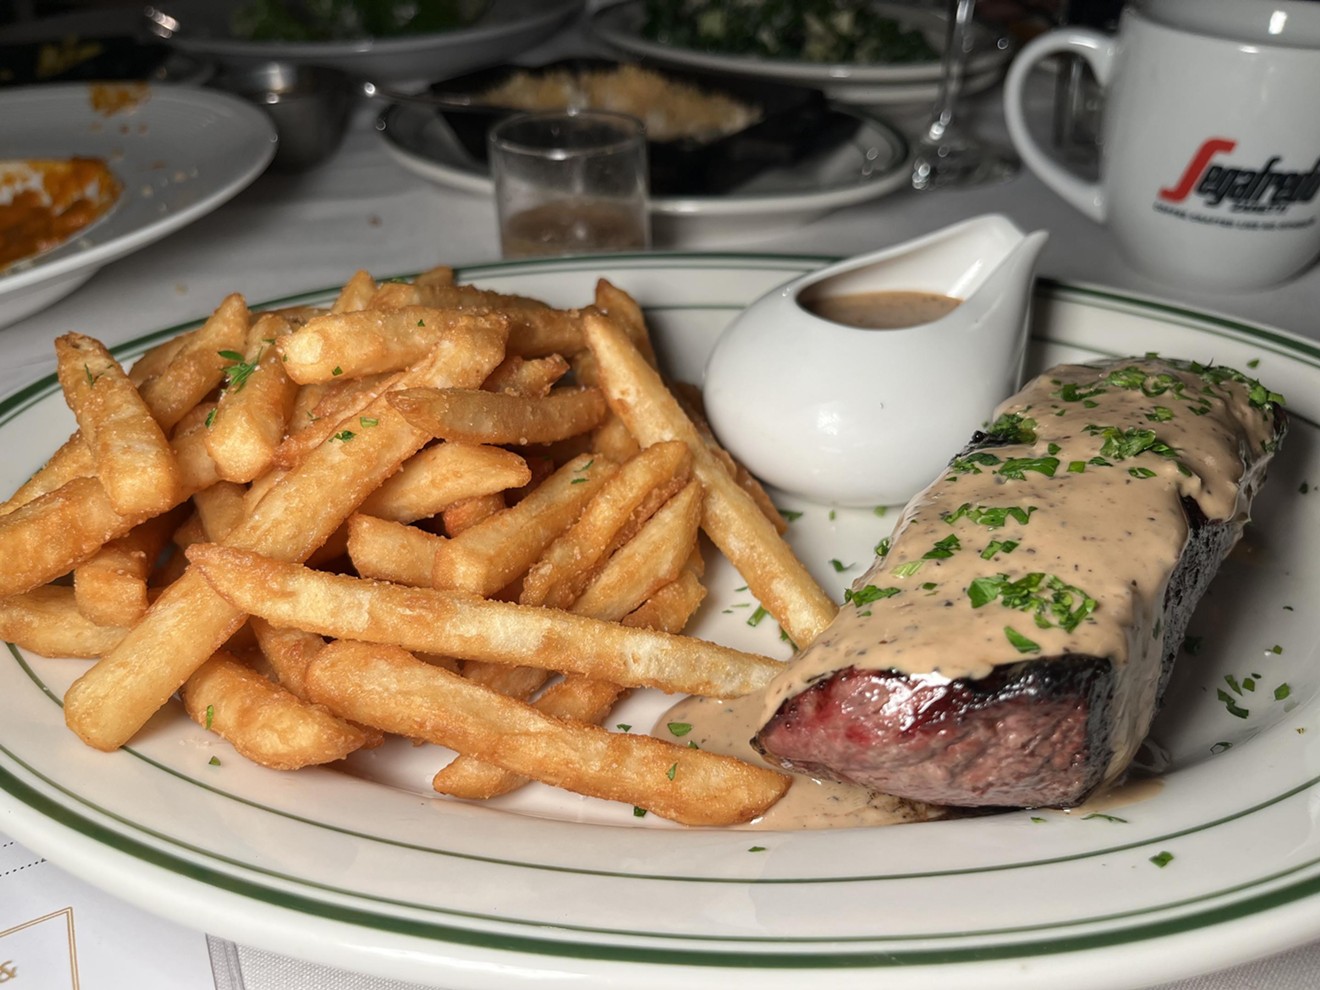 Affordable steak never looked so good.